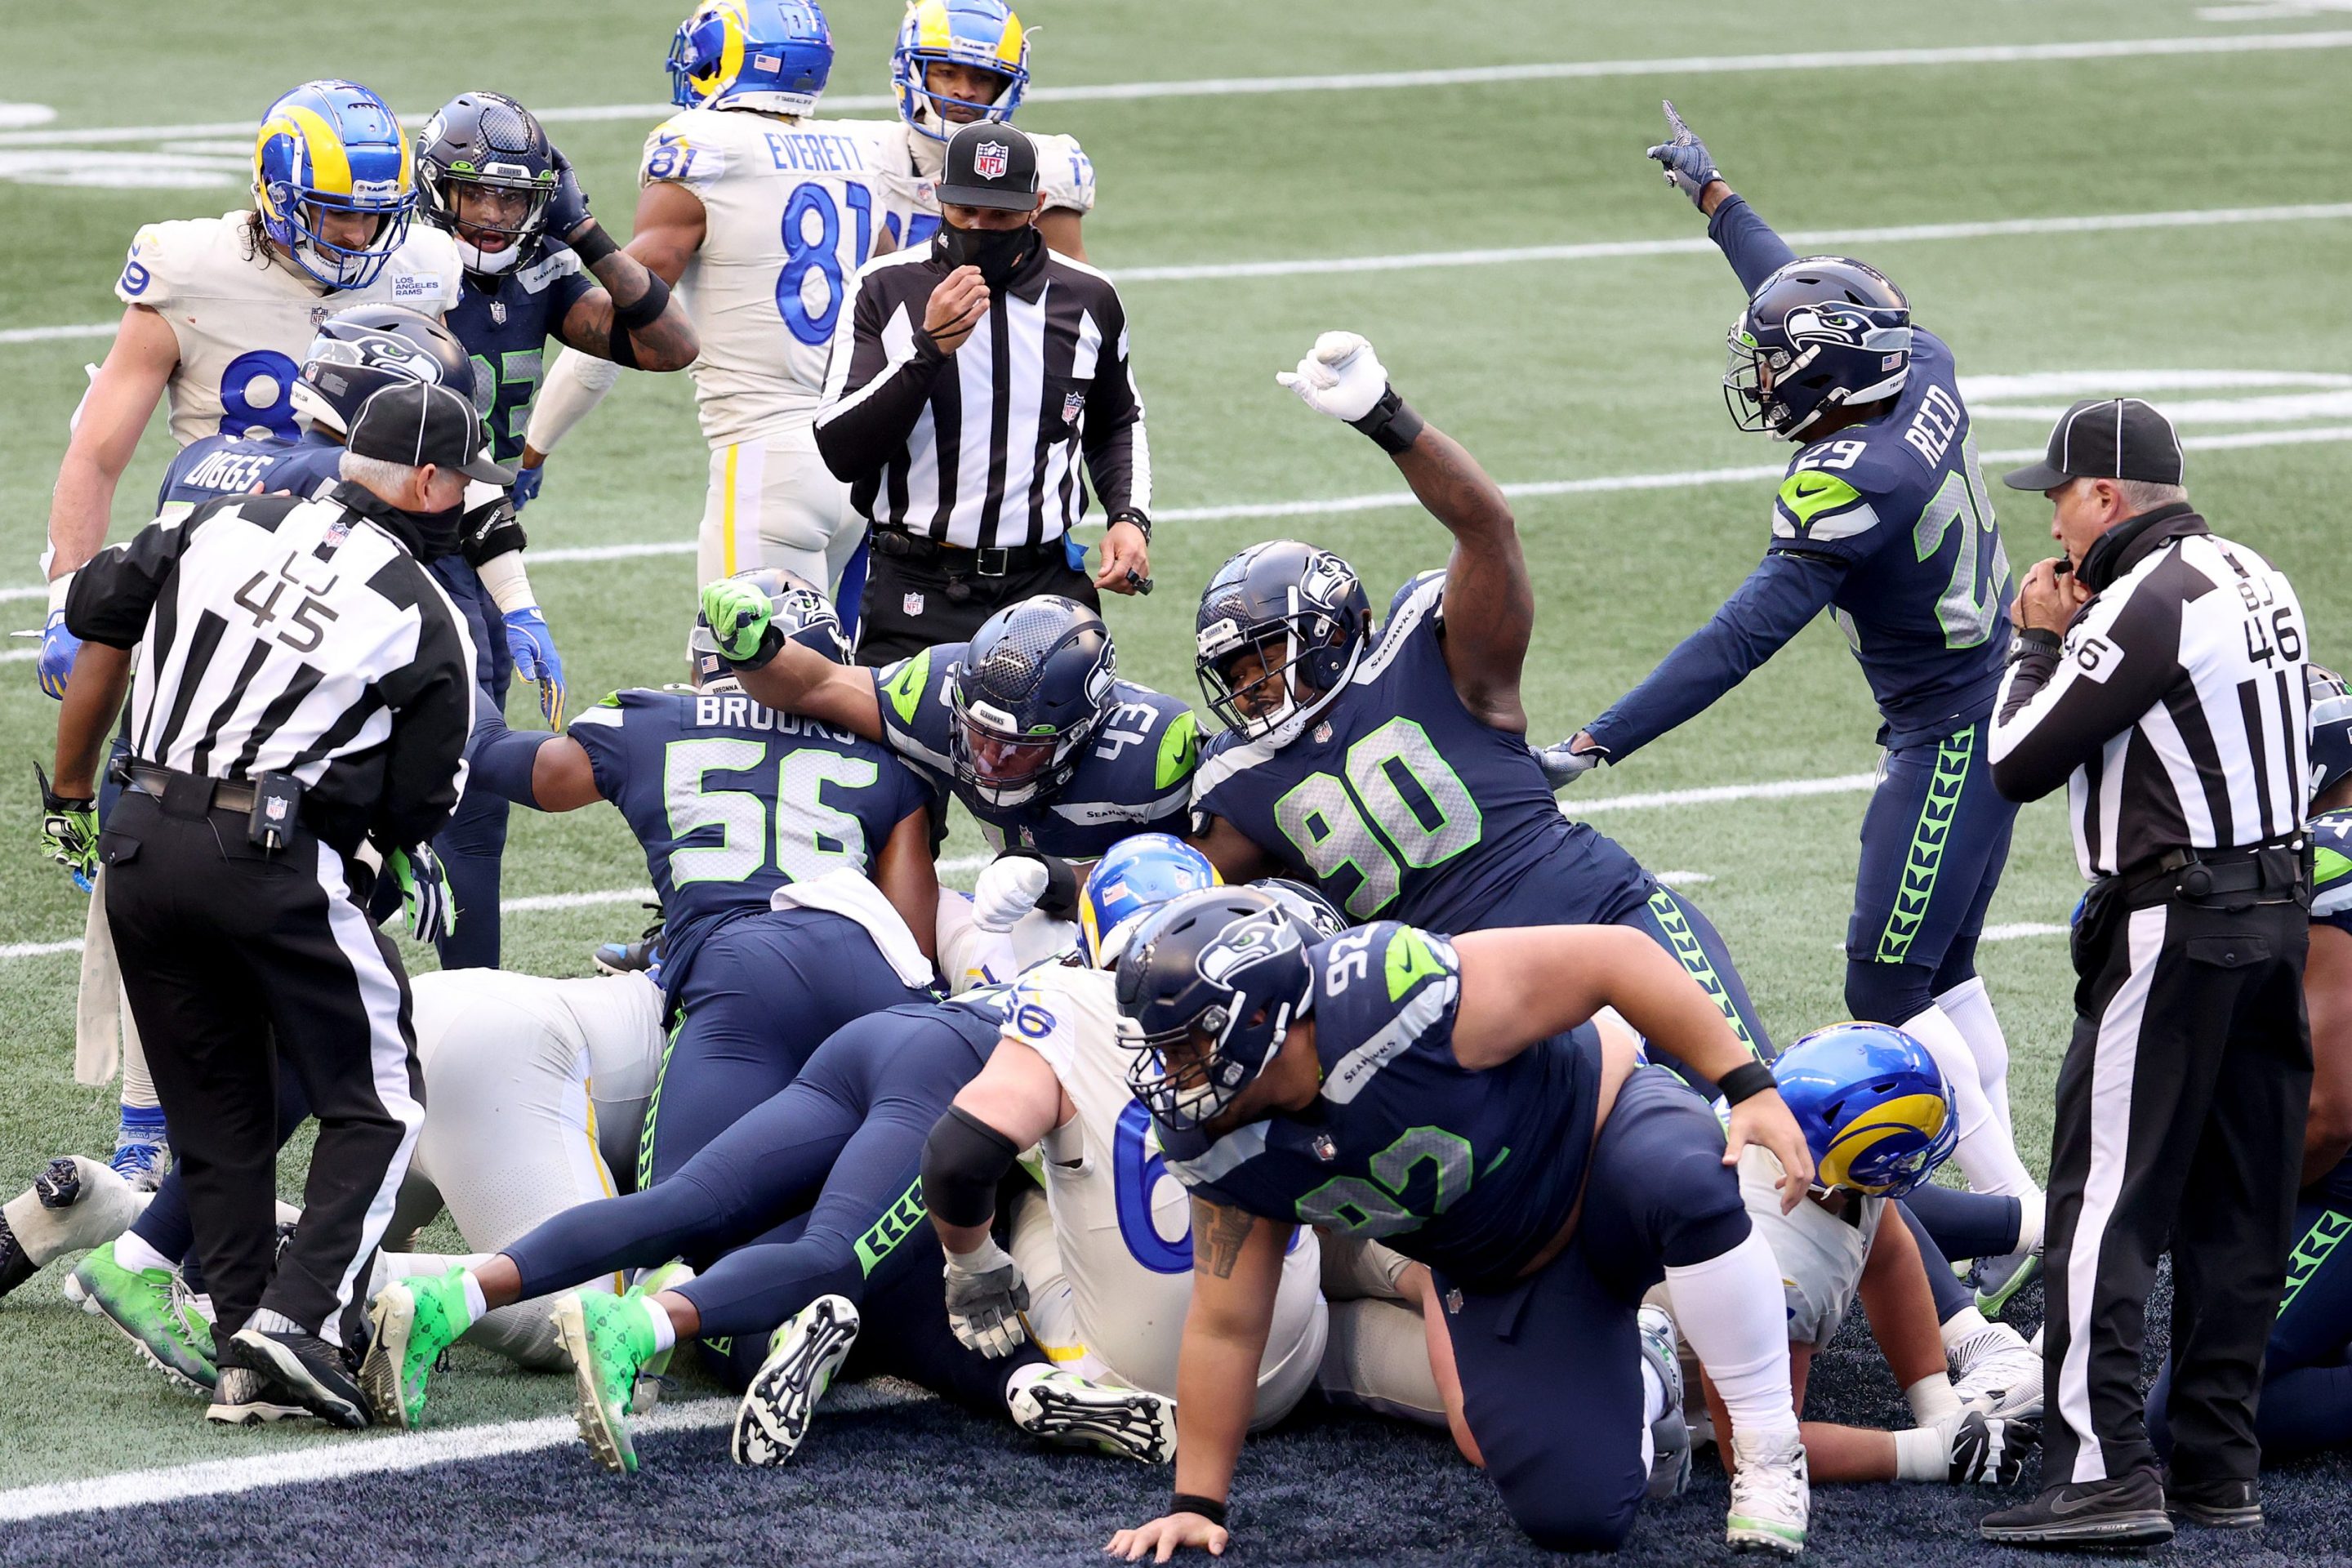 The Seattle Seahawks defense celebrates a stop on third down